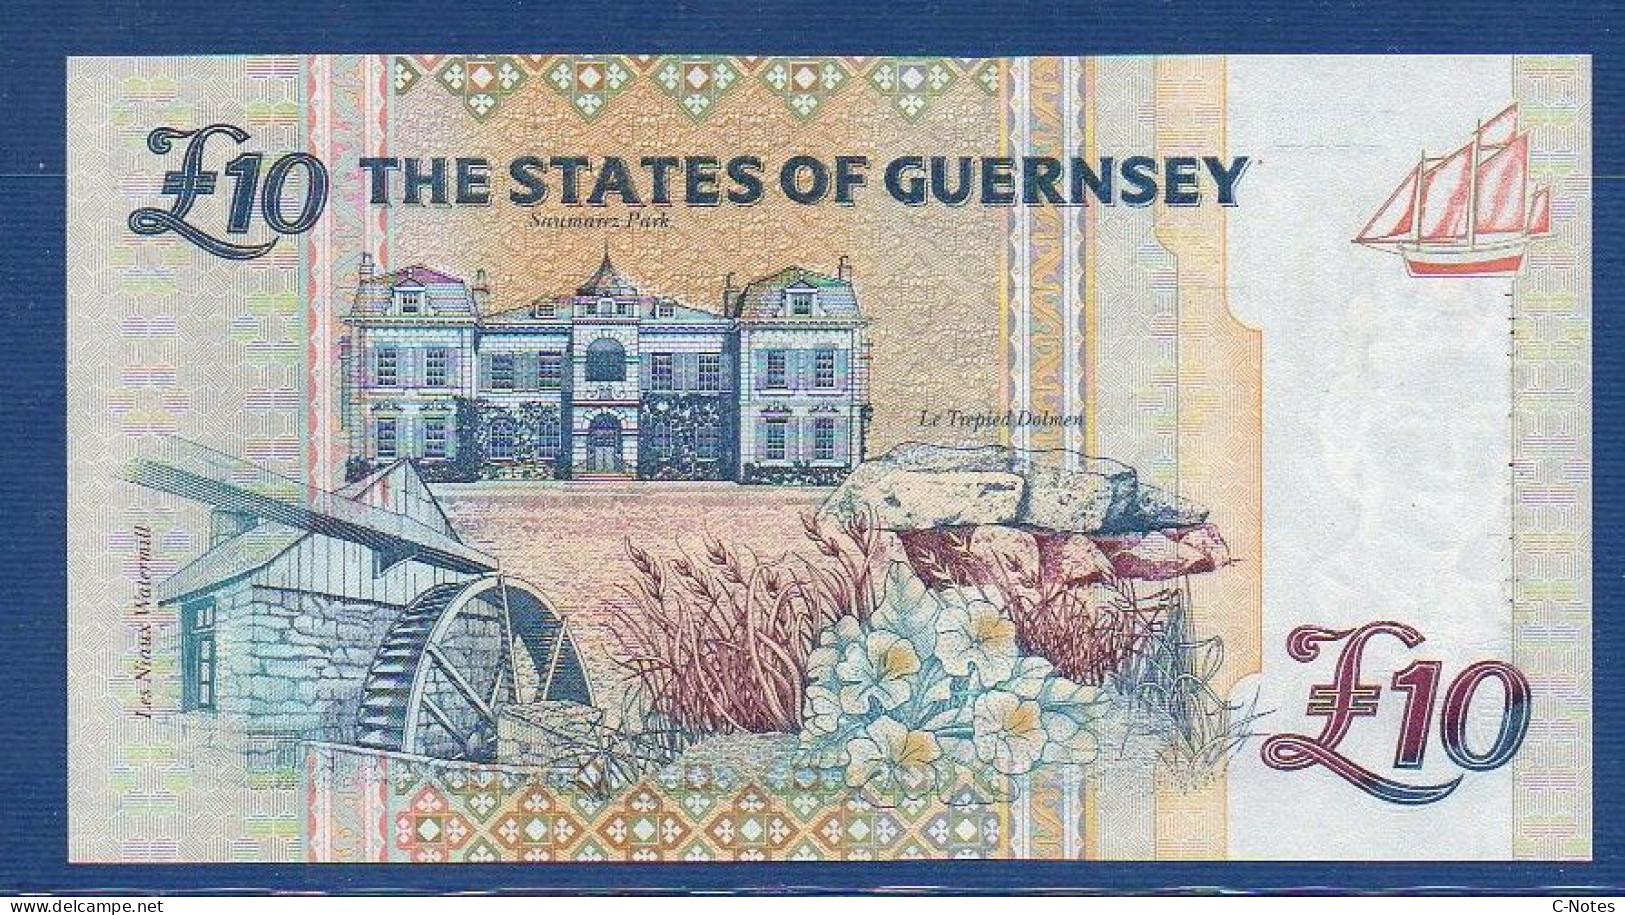 GUERNSEY - P. 57c -  10 Pounds ND (1995 - 2023) UNC, S/n E000232  - LOW NUMBER - Guernsey